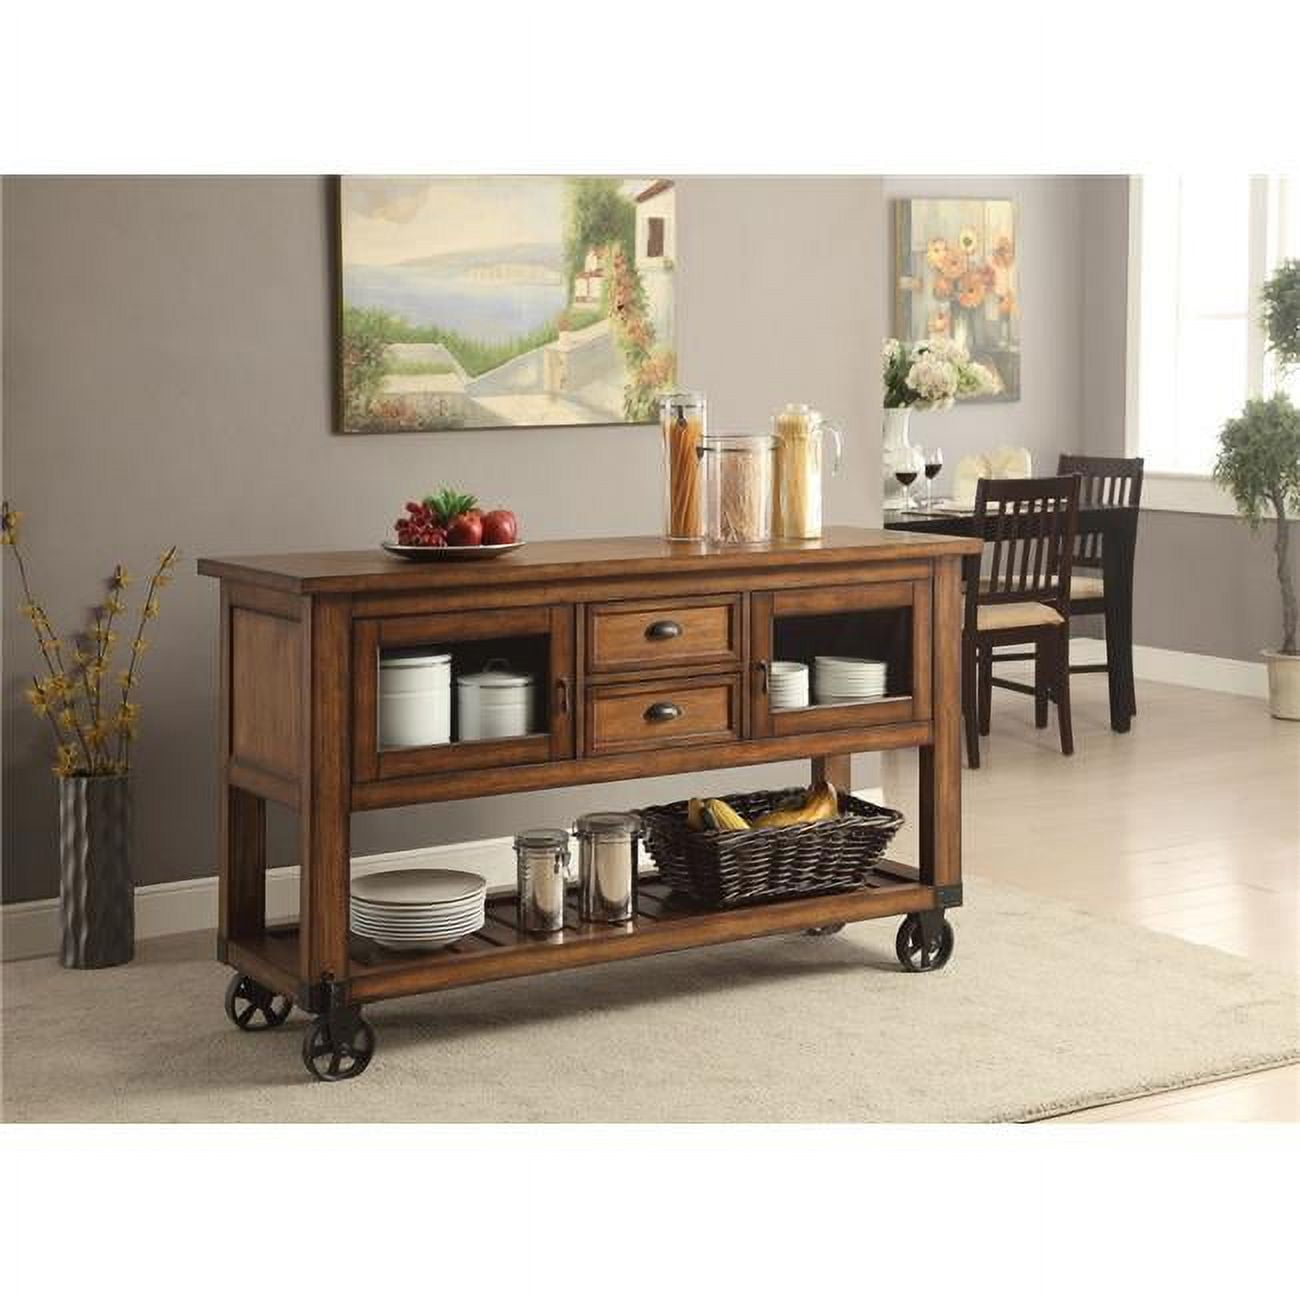 Picture of ACME 98180 Kadri Kitchen Cart, Distressed Chestnut - 36 x 58 x 20 in.